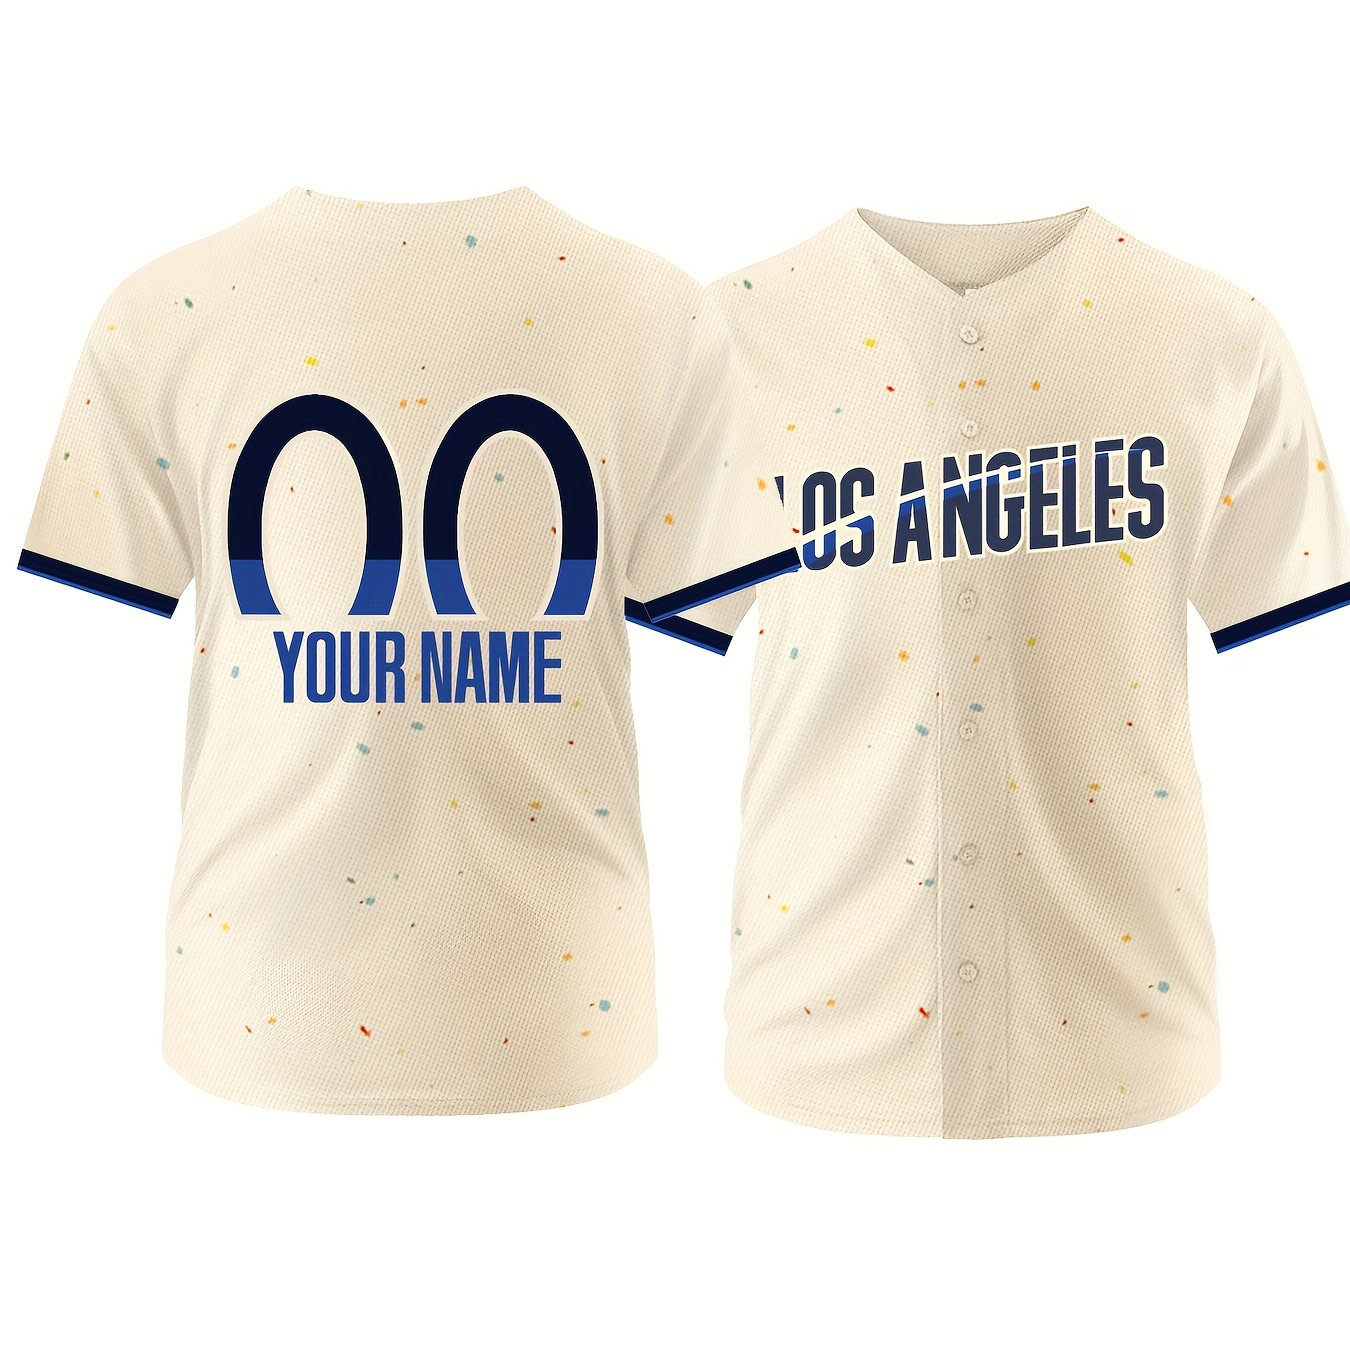 

Customized Name And Number, Men's Baseball Jersey, Comfy Top For Training And Competition